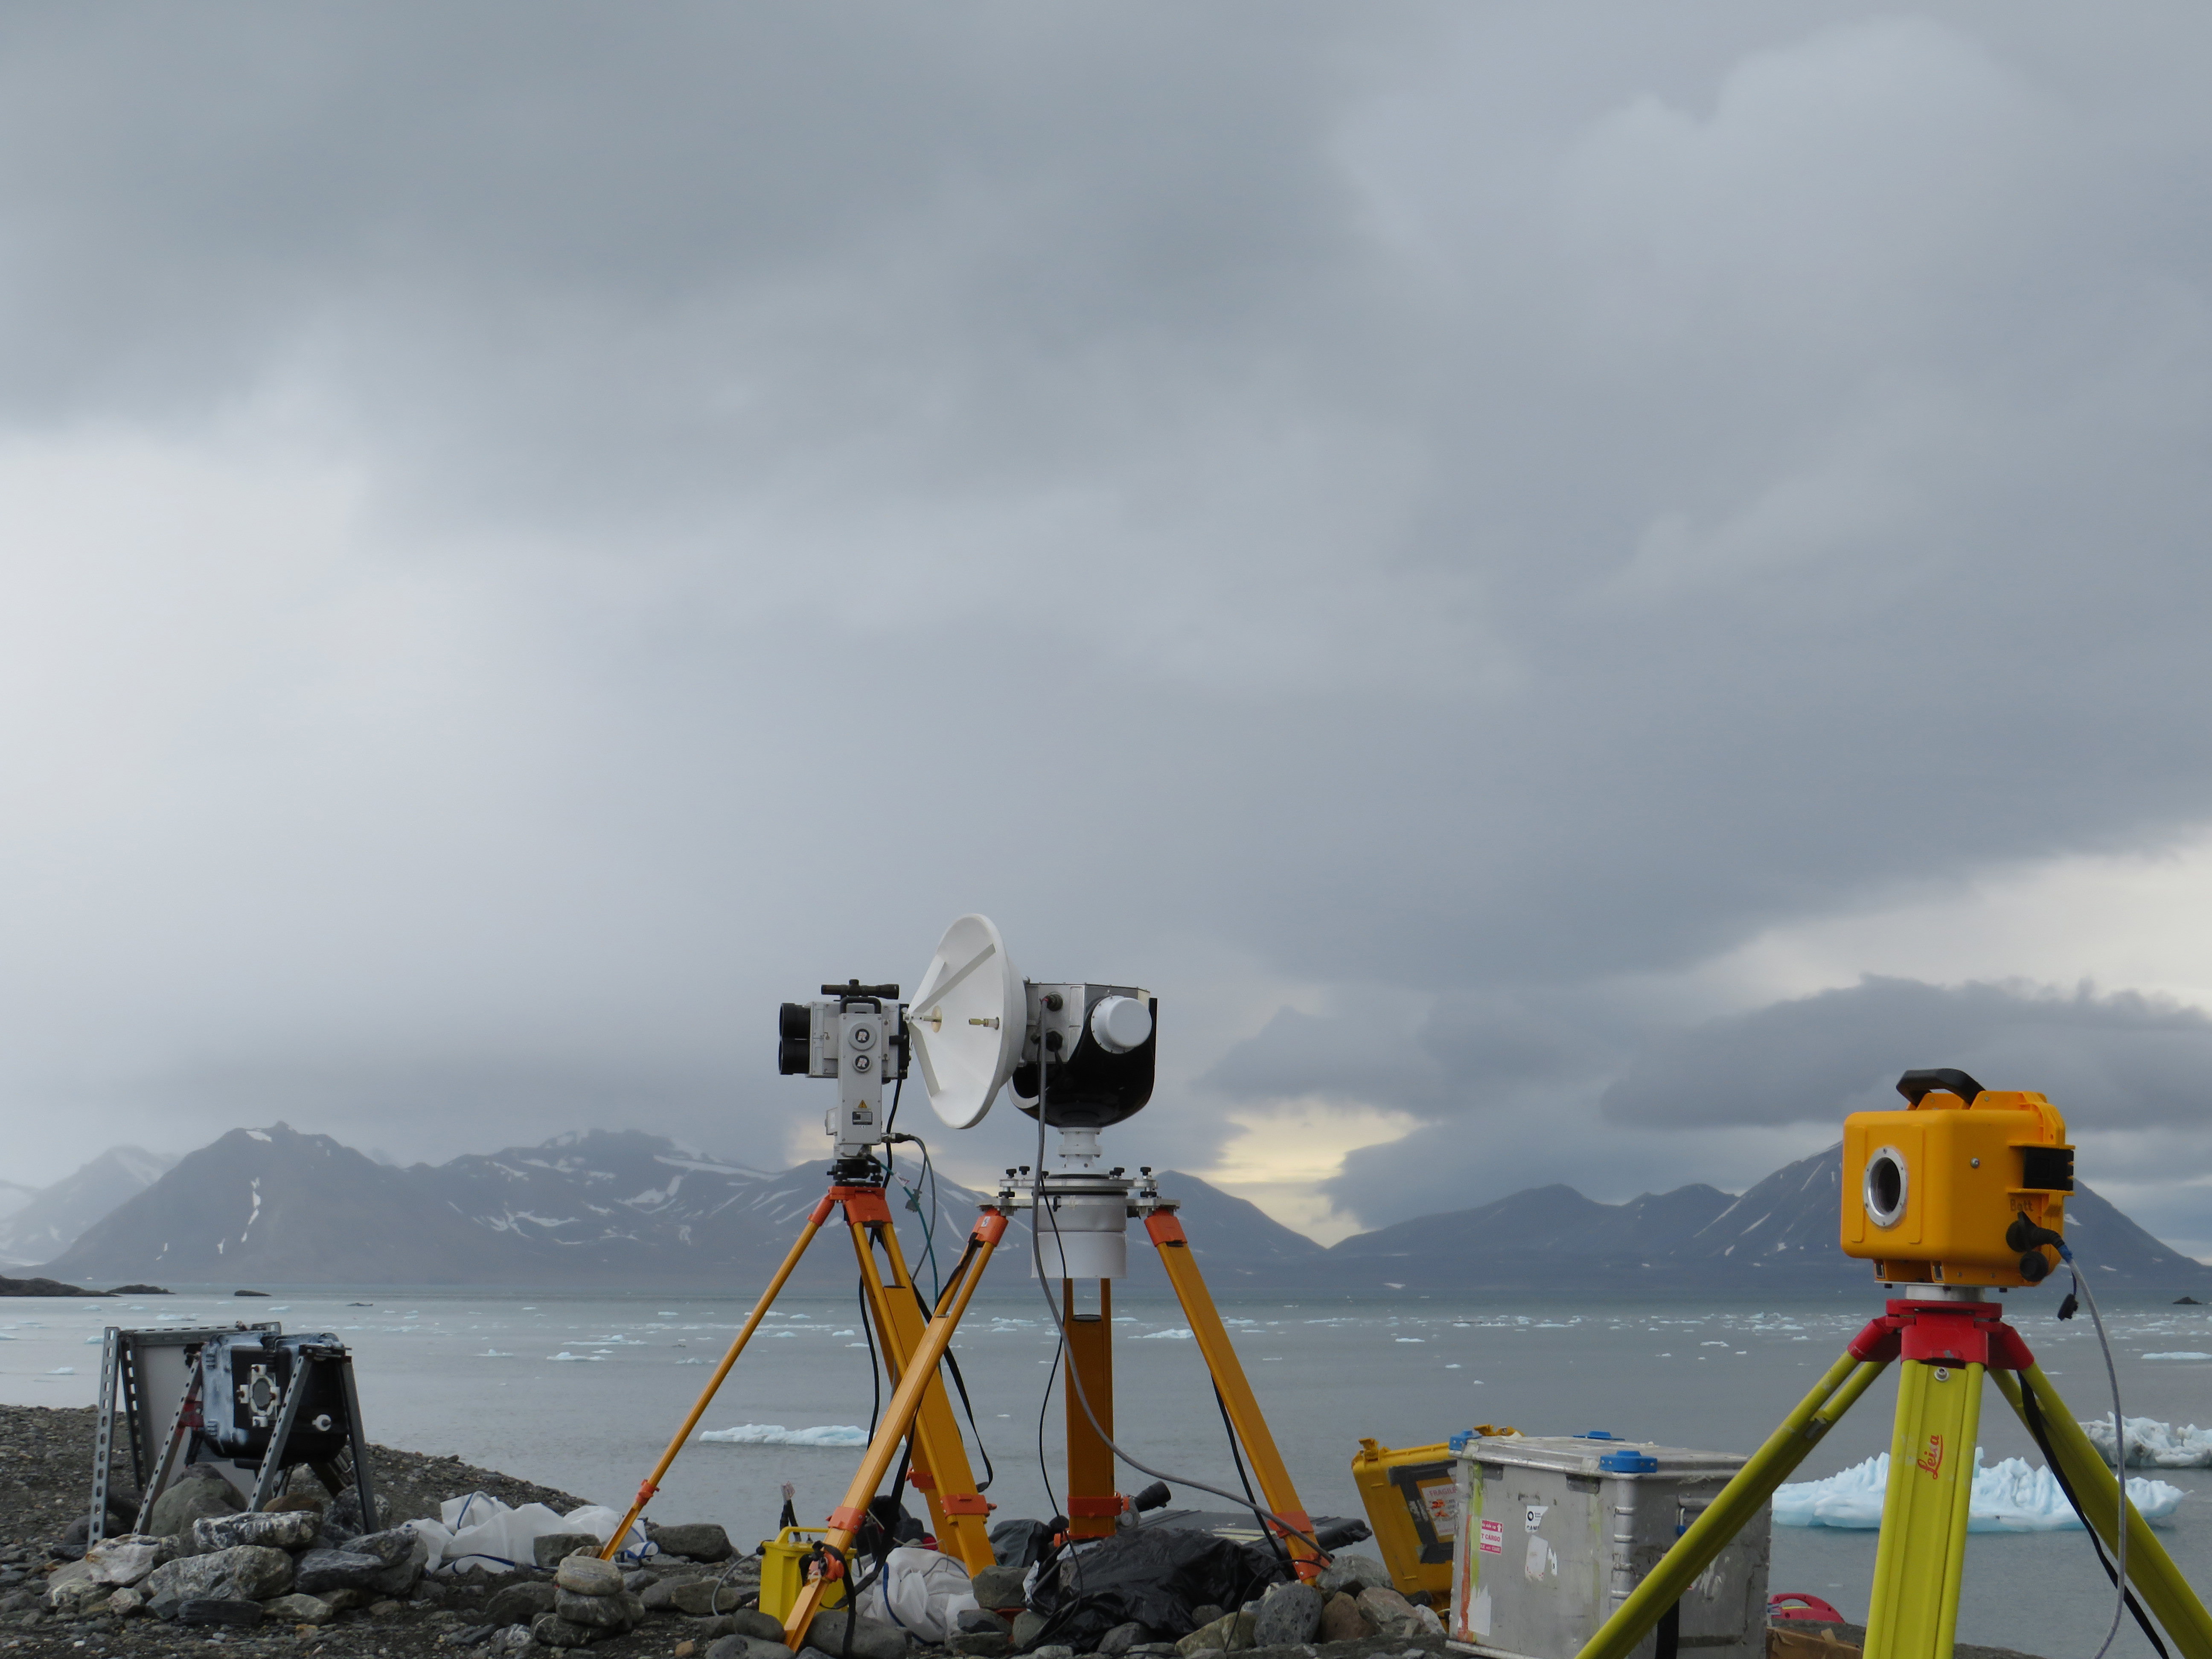 Three imaging cameras set up on tripods next to a lake, with mountains in the background. 